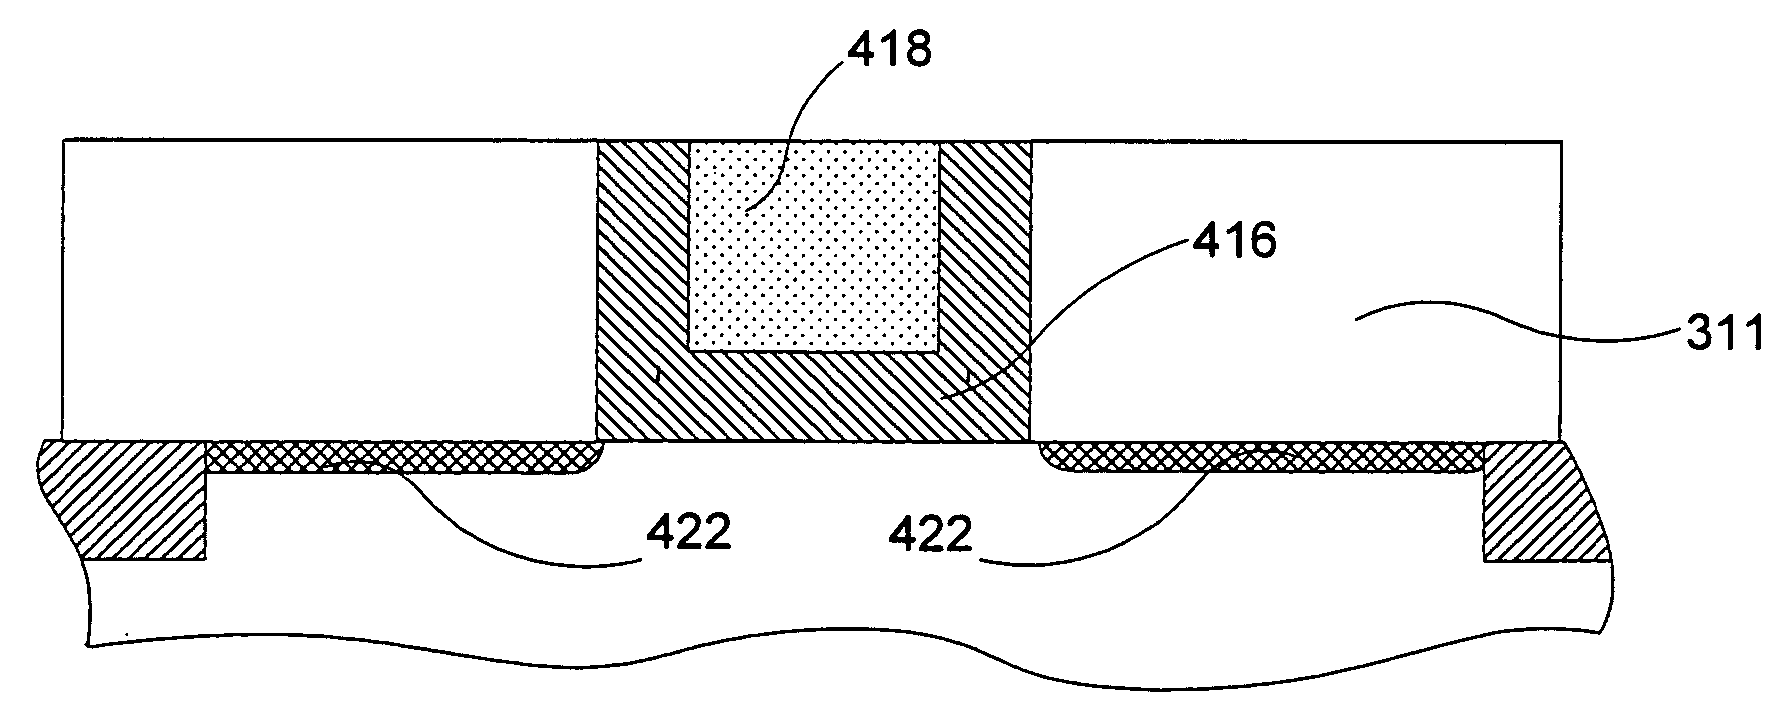 MOSFET structures with conductive niobium oxide gates